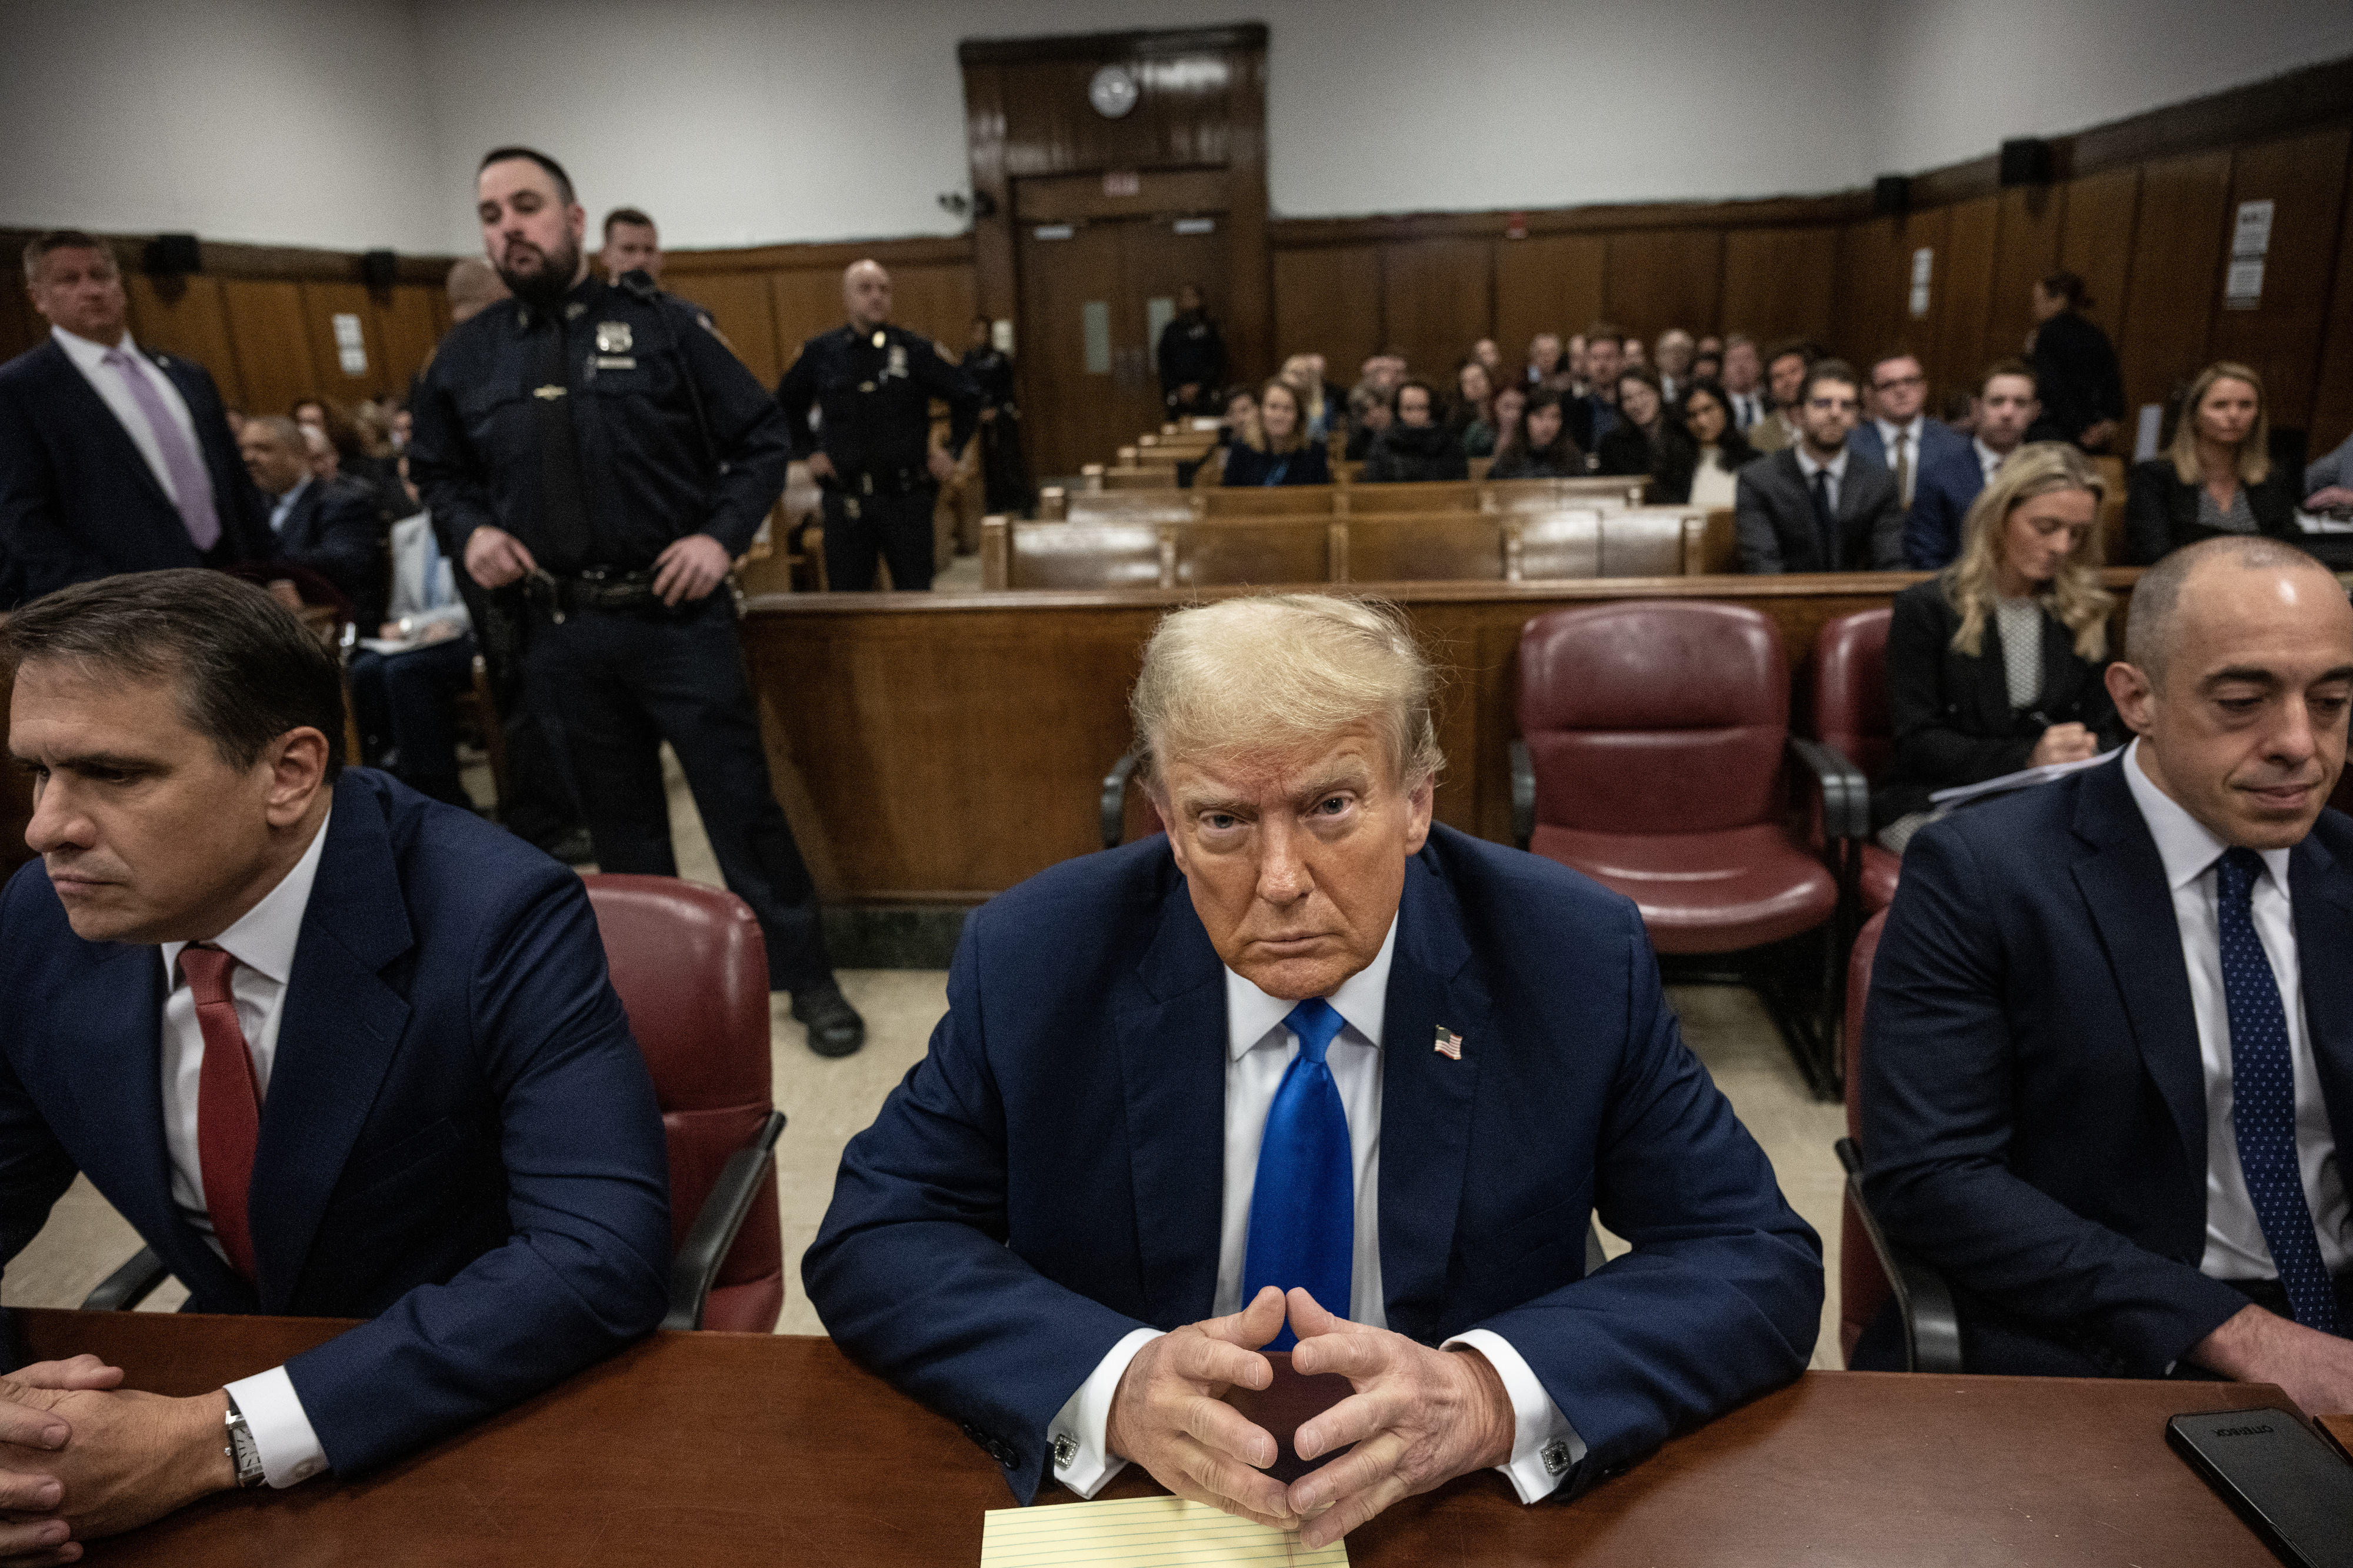 trump on trial: personal anguish, political defiance and a loss of control